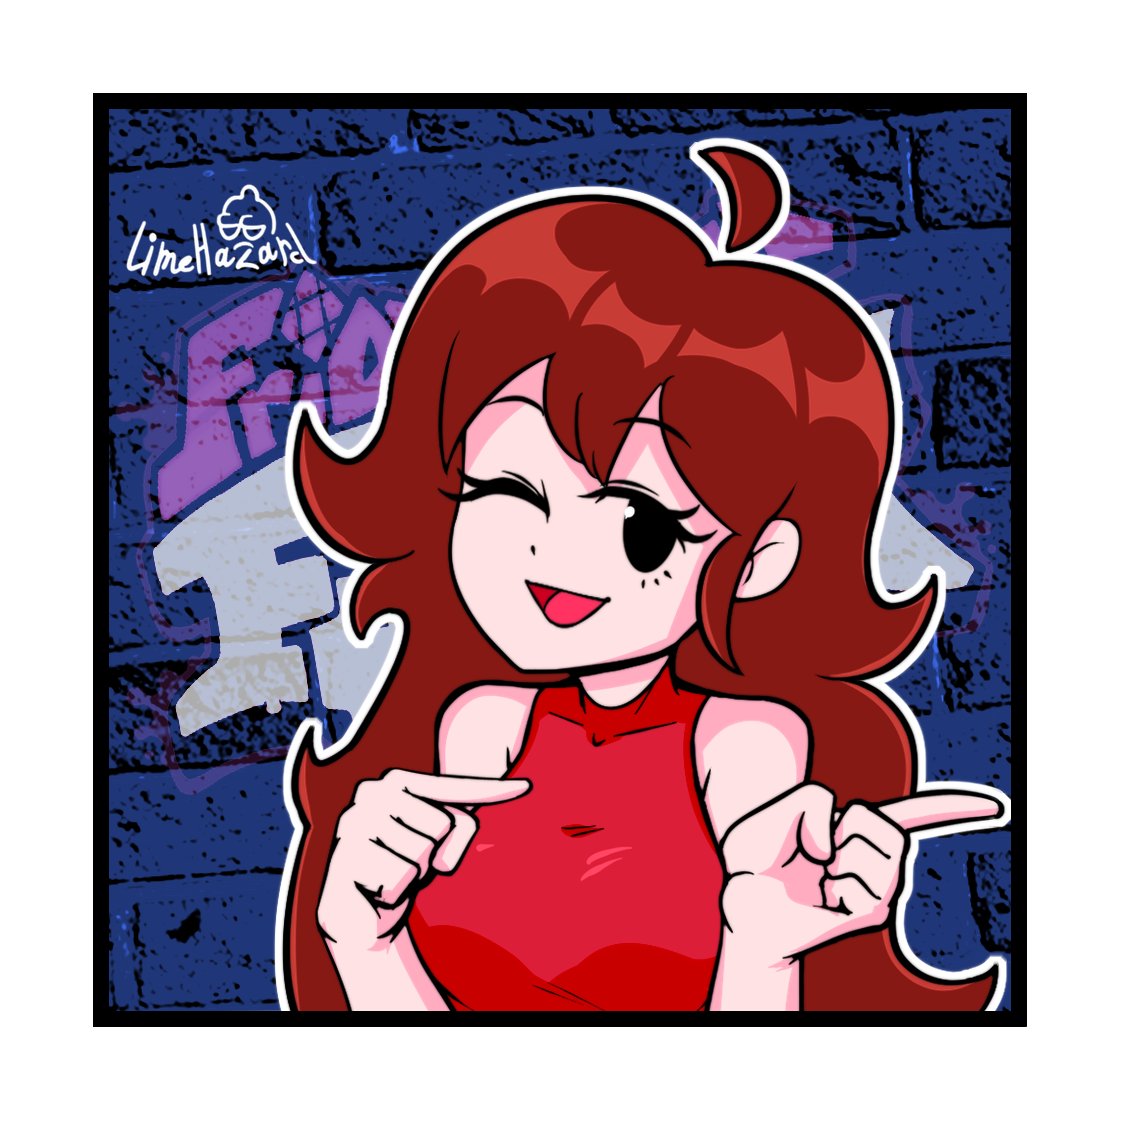 Girlfriend from Friday Night Funkin', currently hot new rythm game developped by these folks at @Newgrounds?: @ninja_muffin99 @PhantomArcade3K @kawaisprite @evilsk8r 